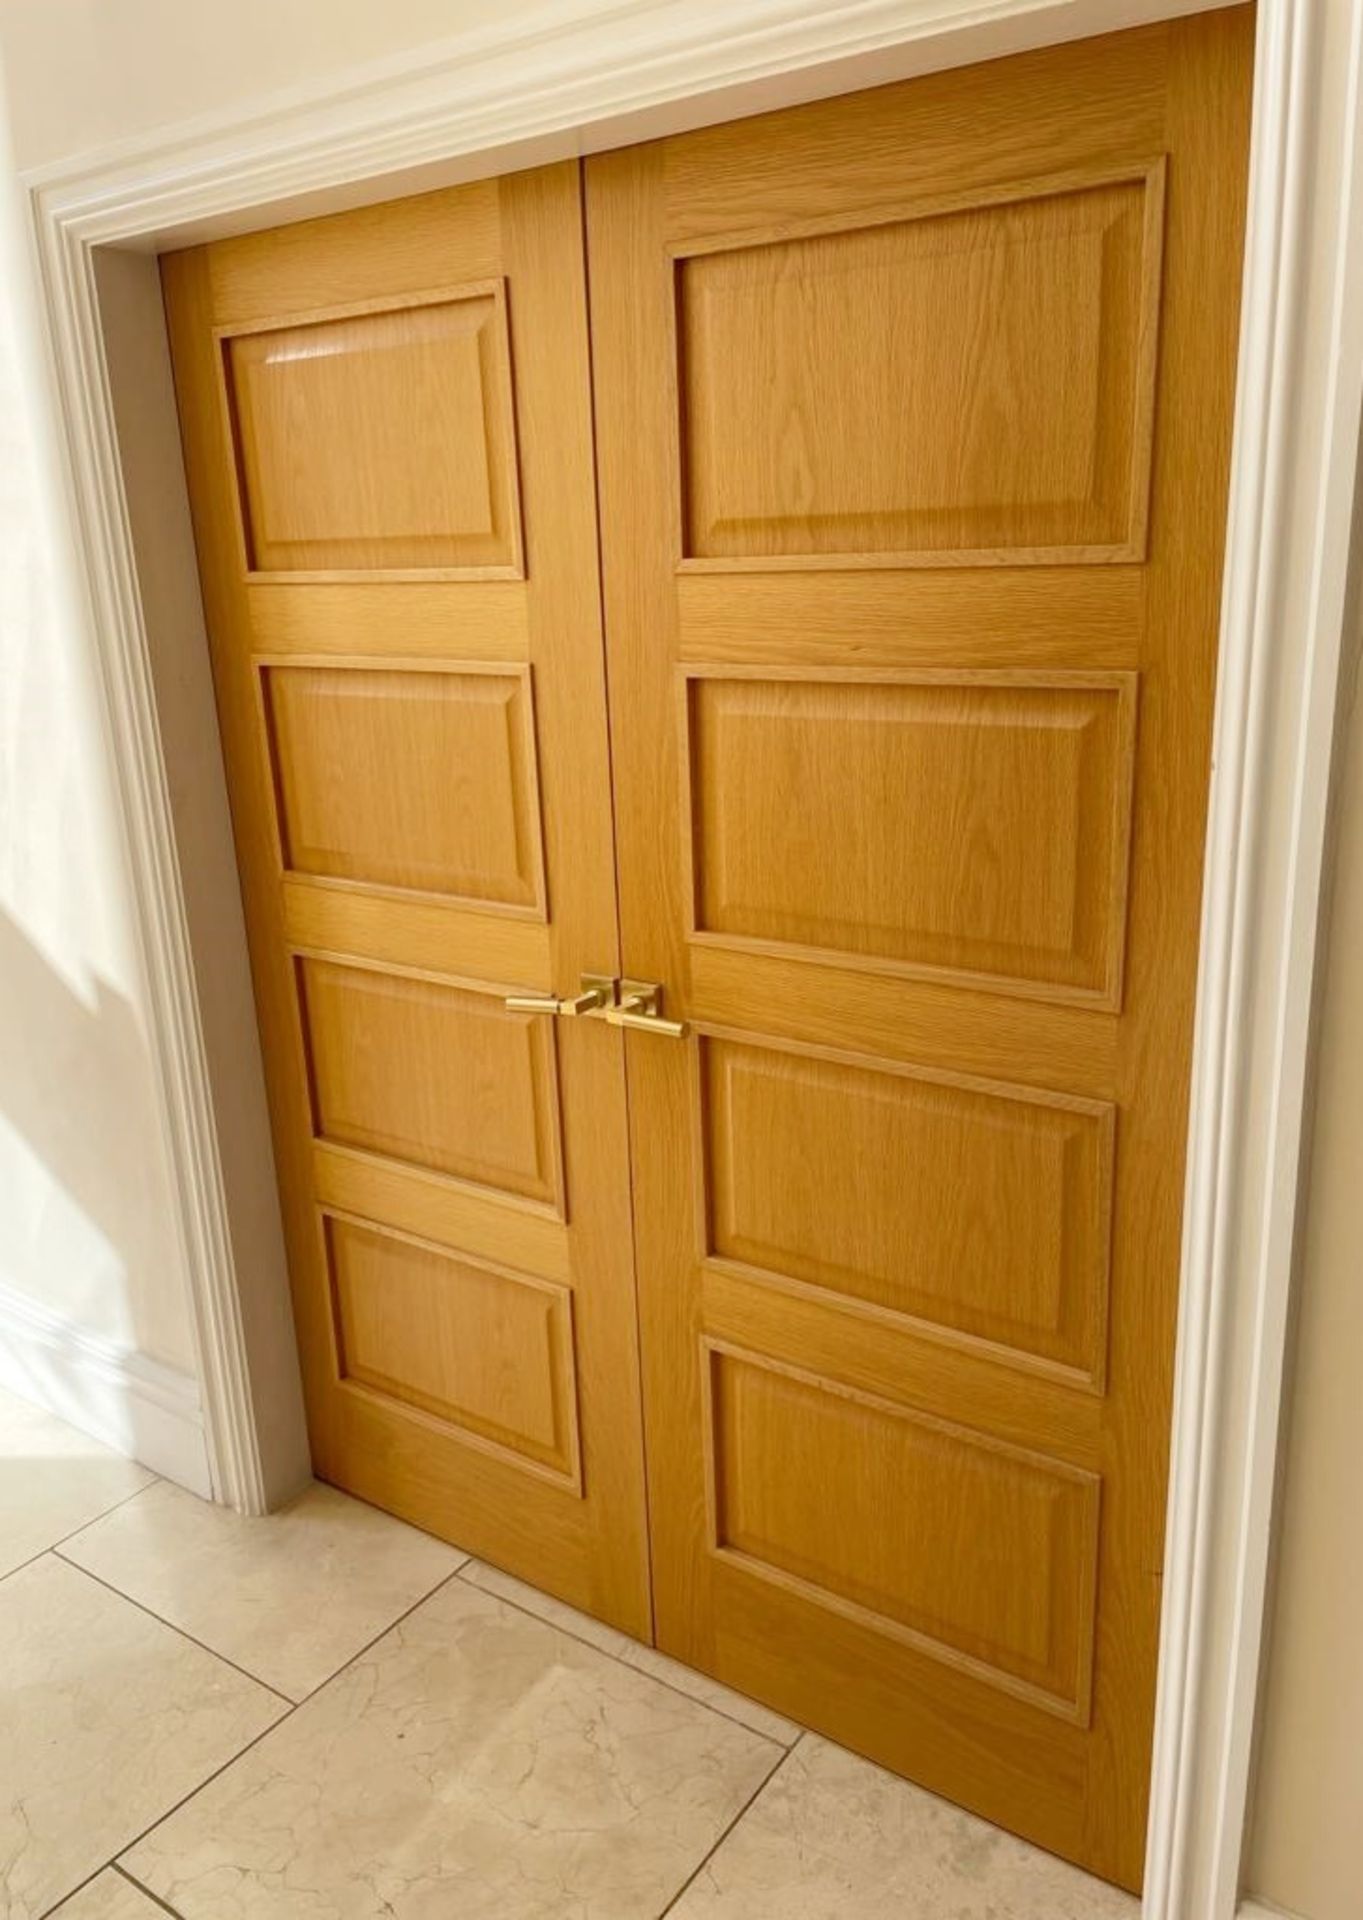 1 x Set of Roble Solid Oak Internal Double Doors - 45mm Thickness Fire Doors - NO VAT ON THE